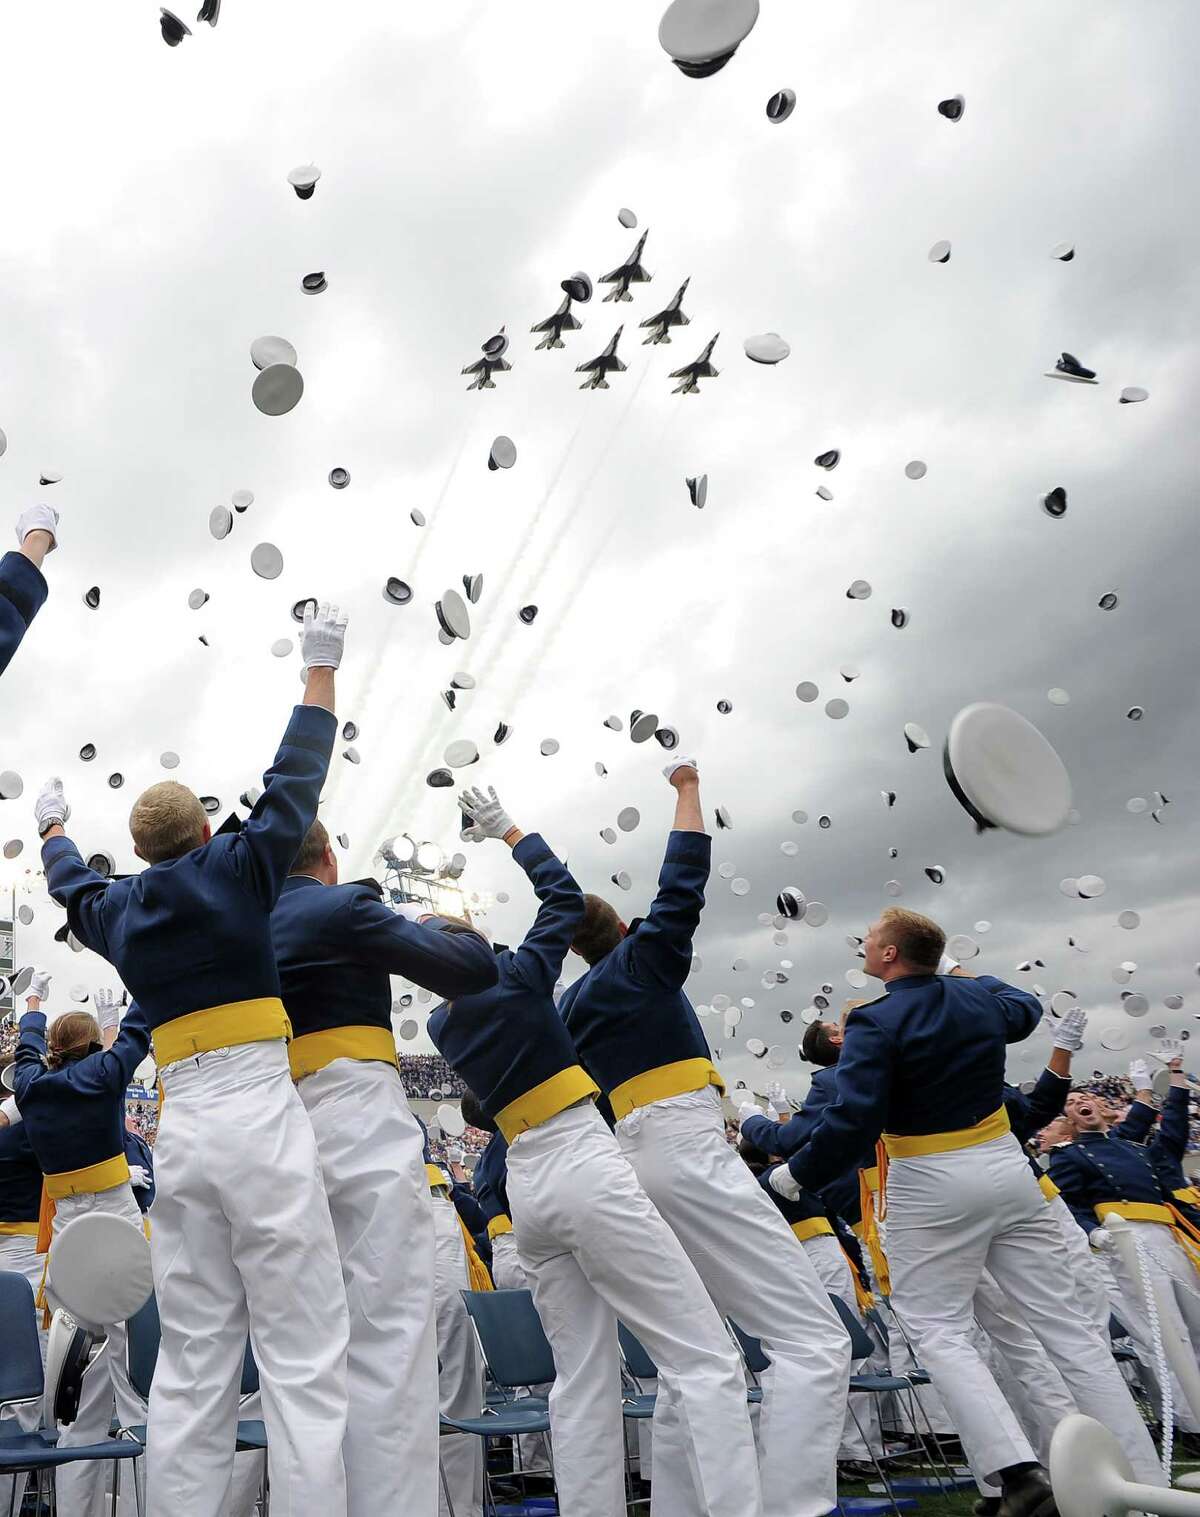 Graduates of US Air Force class 2012 throw their hats in the air as fighter jets fly past during their graduation ceremony at the US Air Force Academy in Colorado Springs, Colorado, on May 23, 2012. AFP PHOTO/Jewel SamadJEWEL SAMAD/AFP/GettyImages